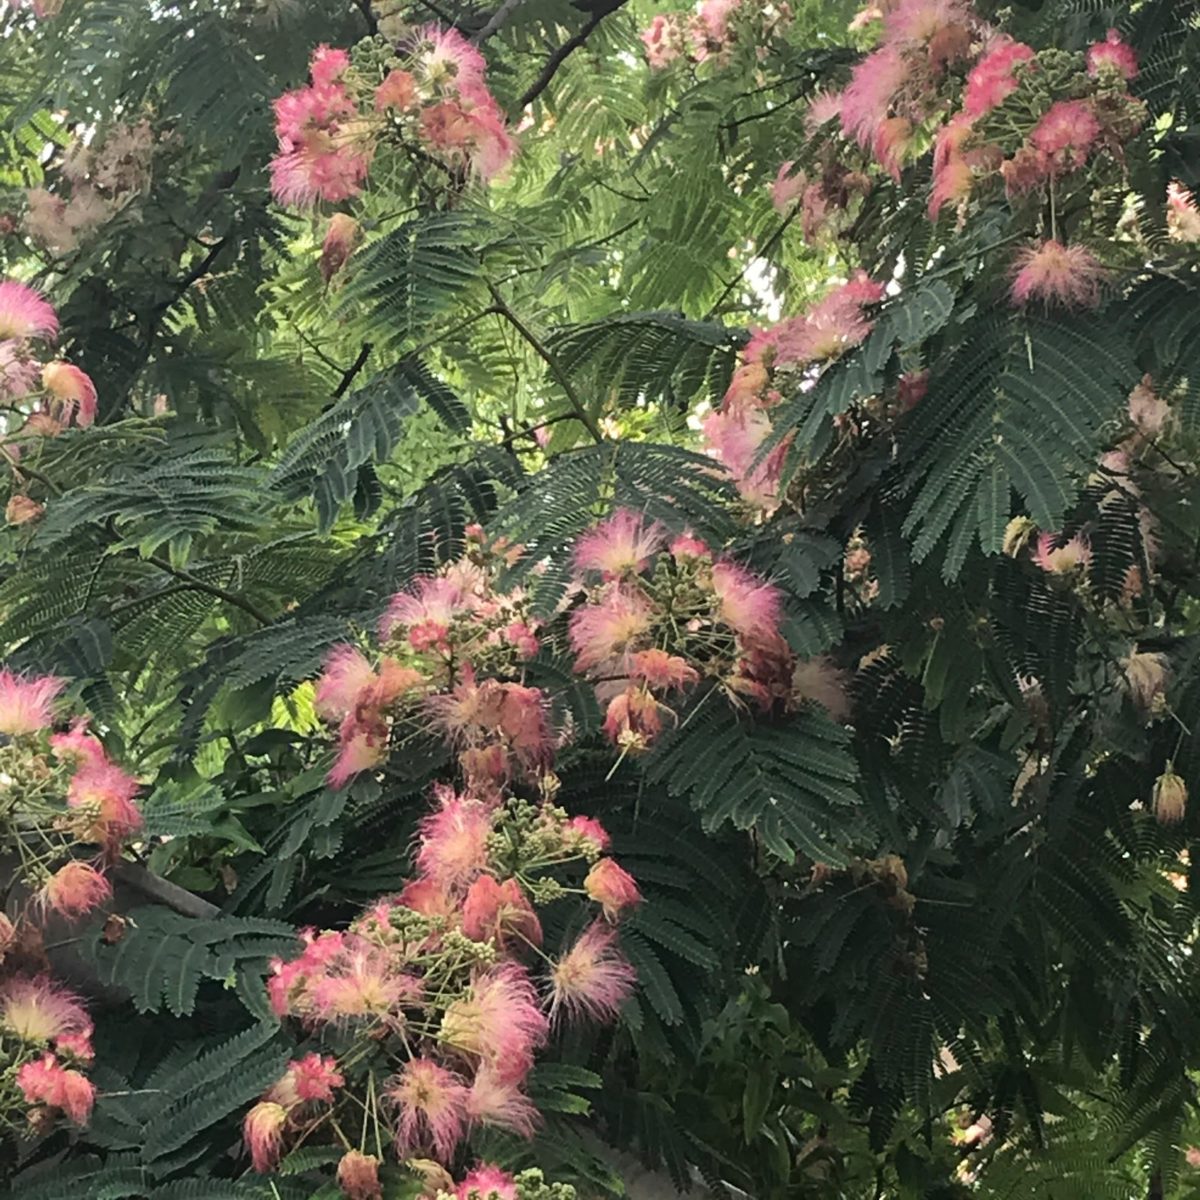 Pink, fuzzy flowers on a mimosa tree